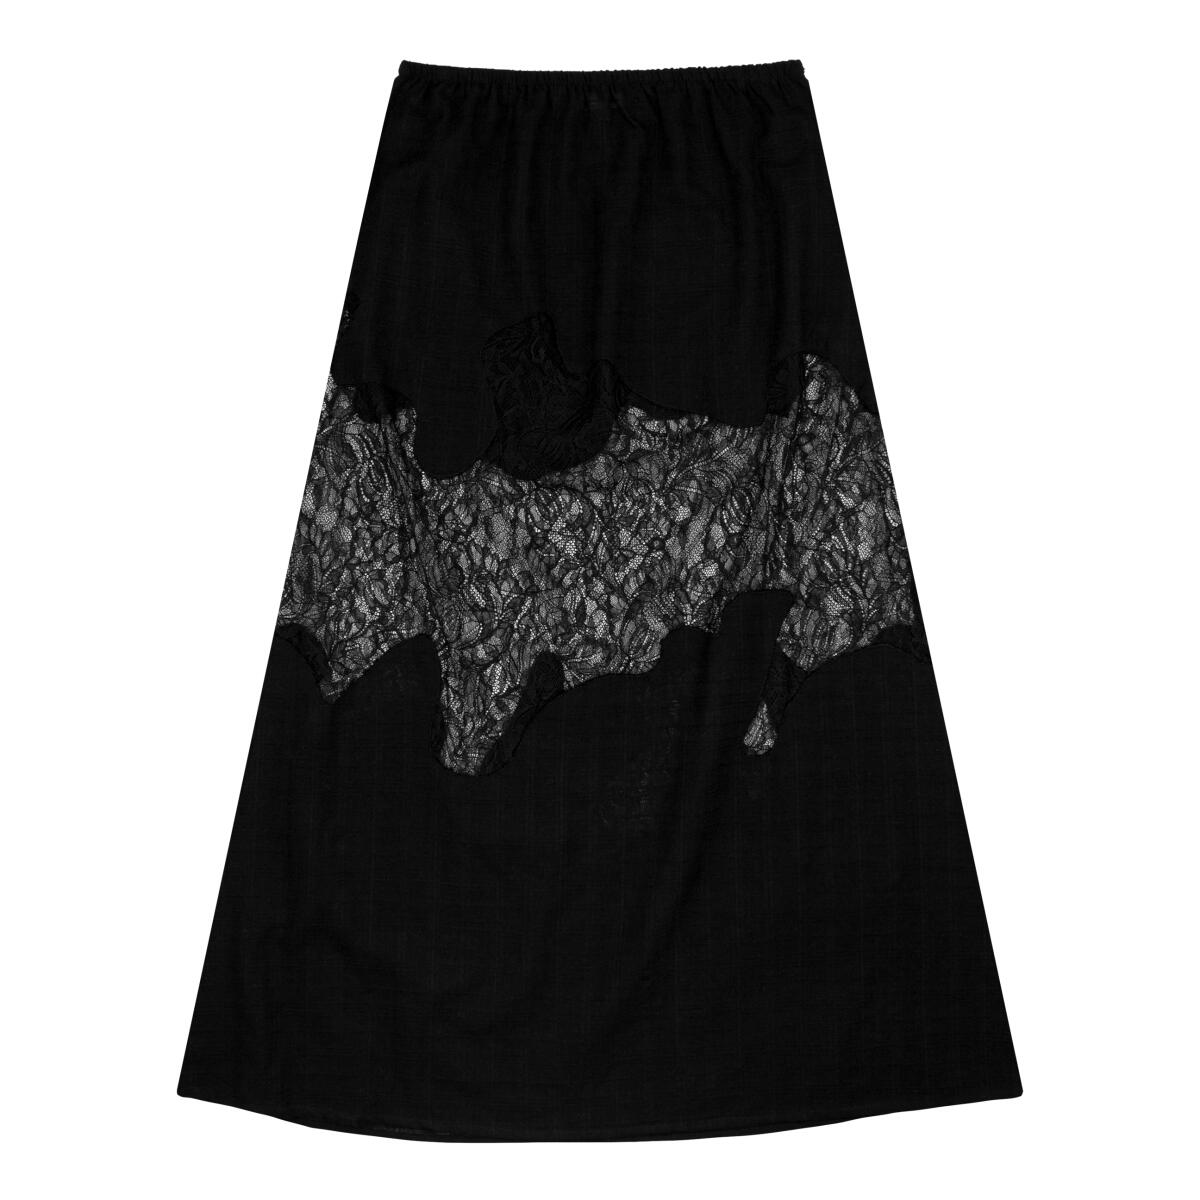 The Sabine graphic skirt ($159) from Andine by Elisabeth Weinstock.